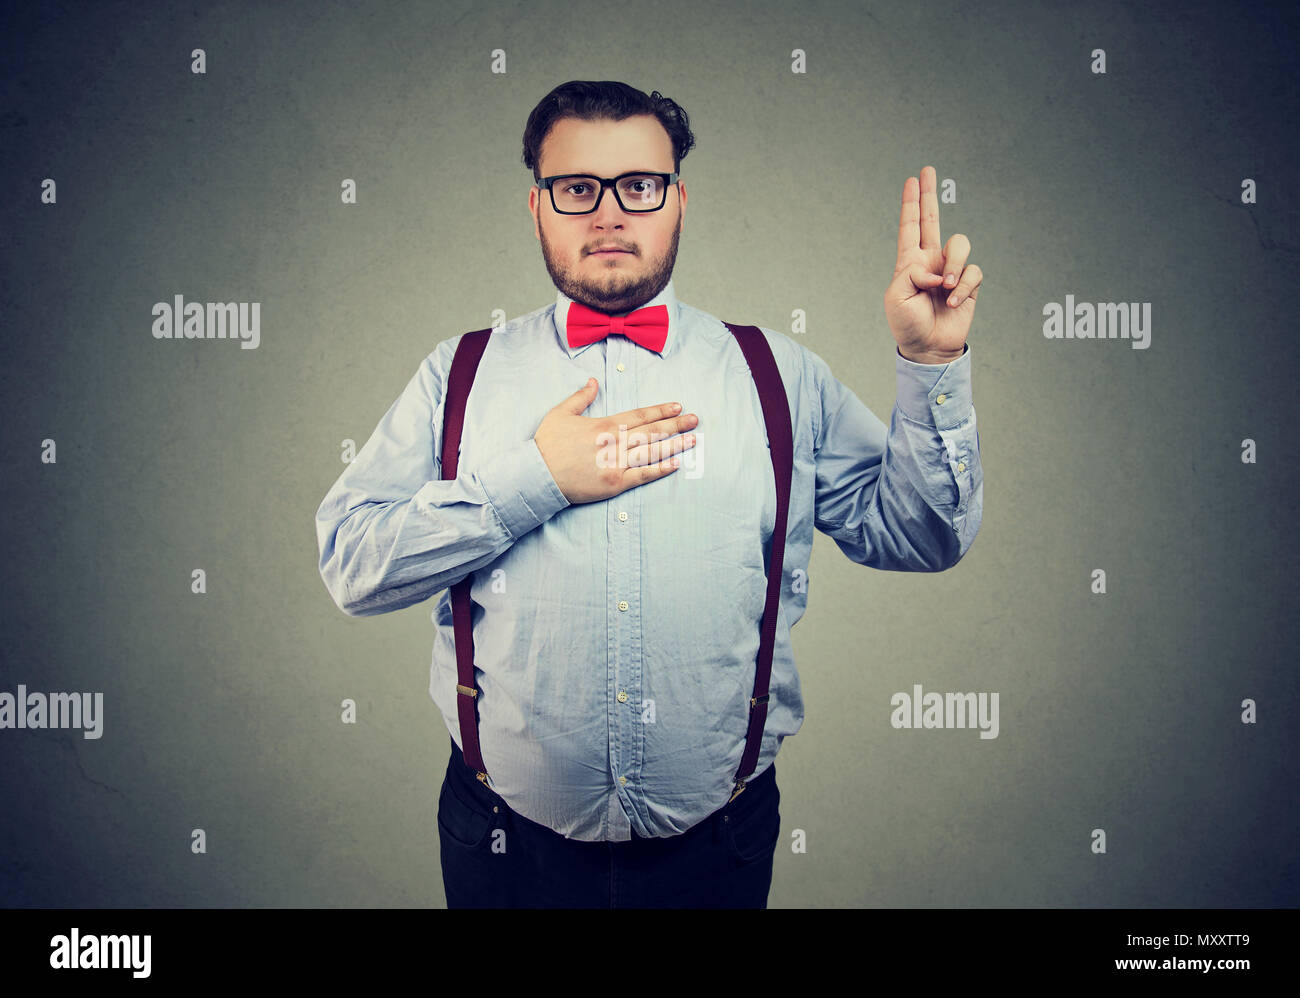 Confident serious man in formal outfit holding hand on chest and making promise looking at camera Stock Photo